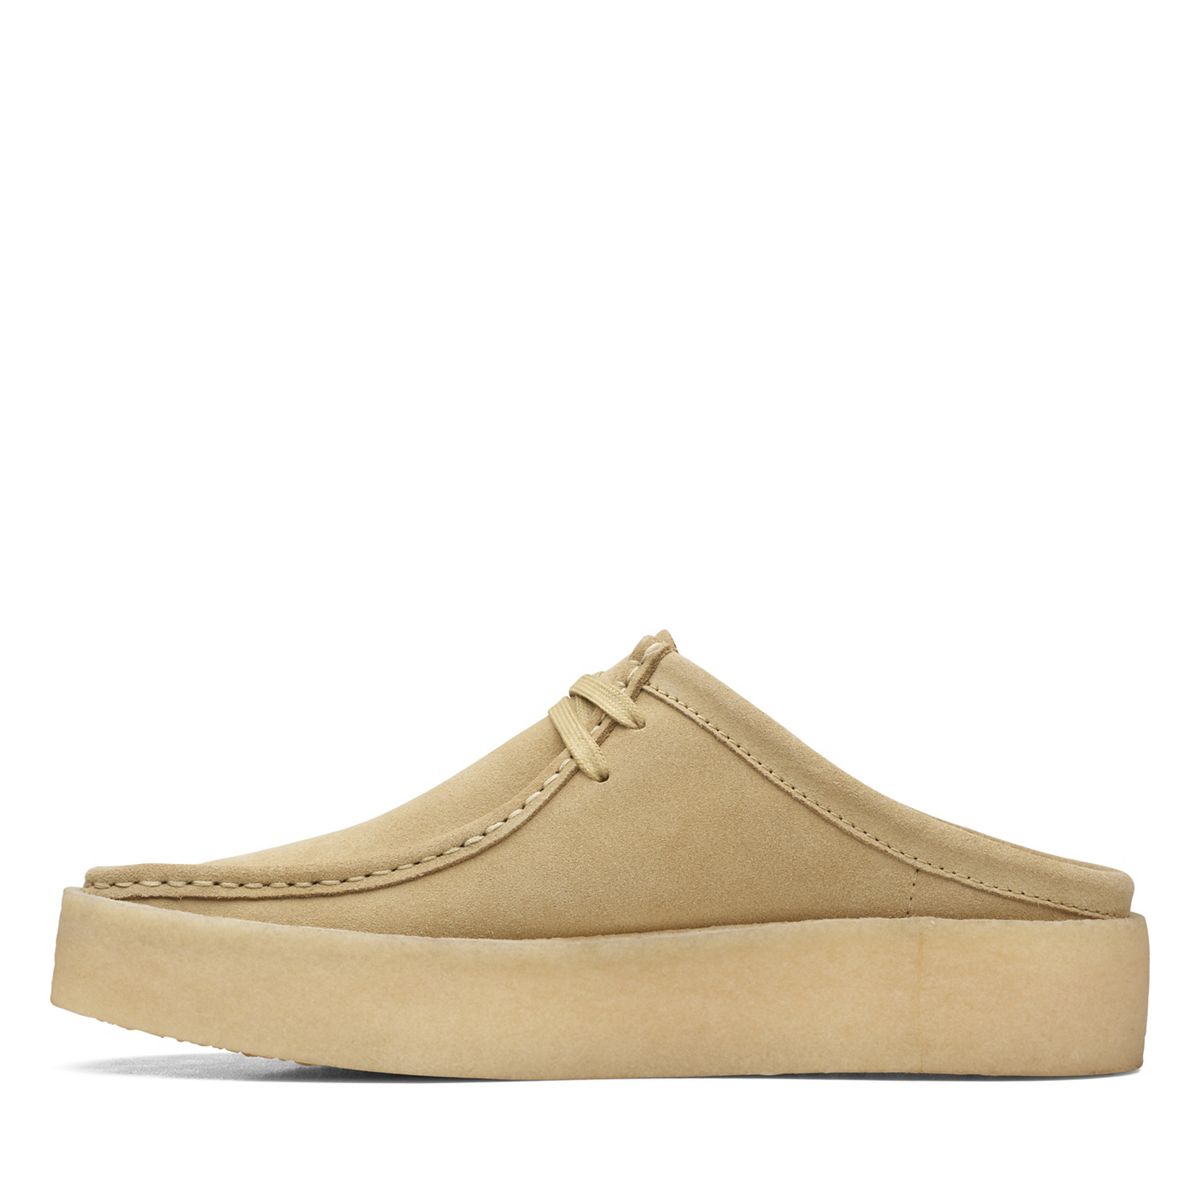 Wallabee Cup Lo Maple Suede Warmlined - Clarks Canada Official